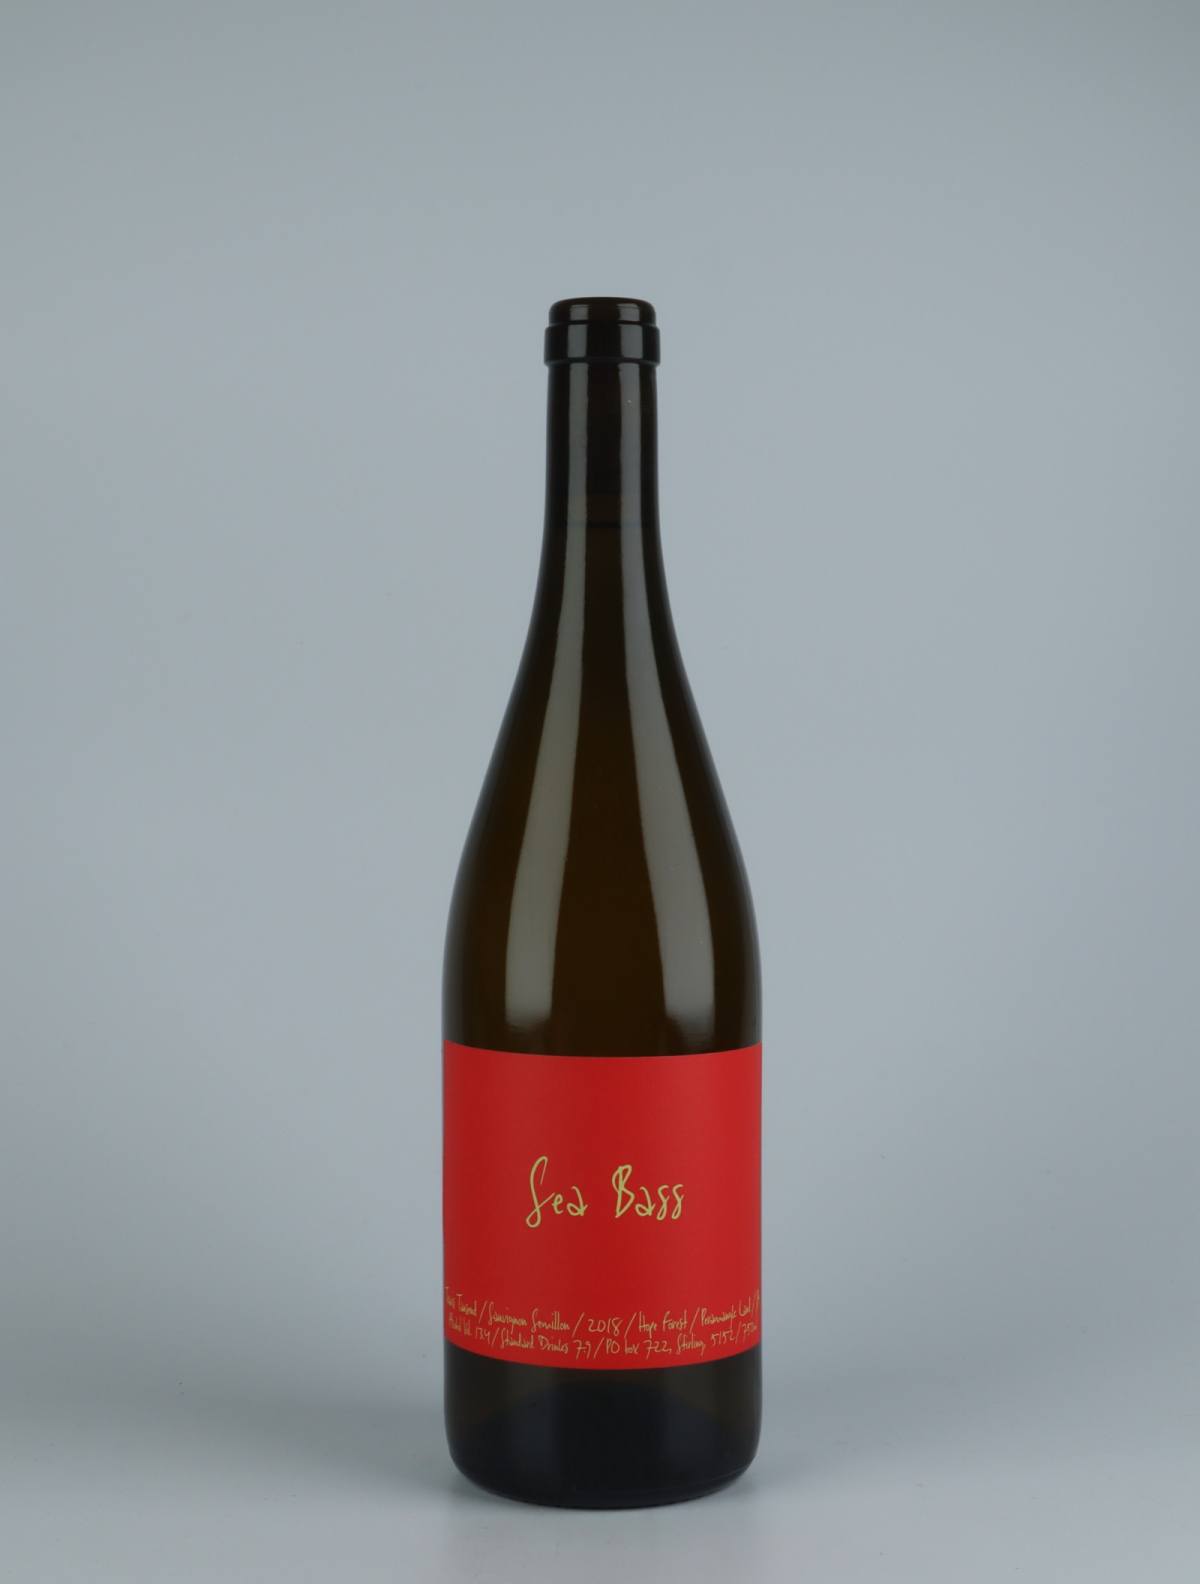 A bottle 2018 Sea Bass White wine from Travis Tausend, Adelaide Hills in Australia